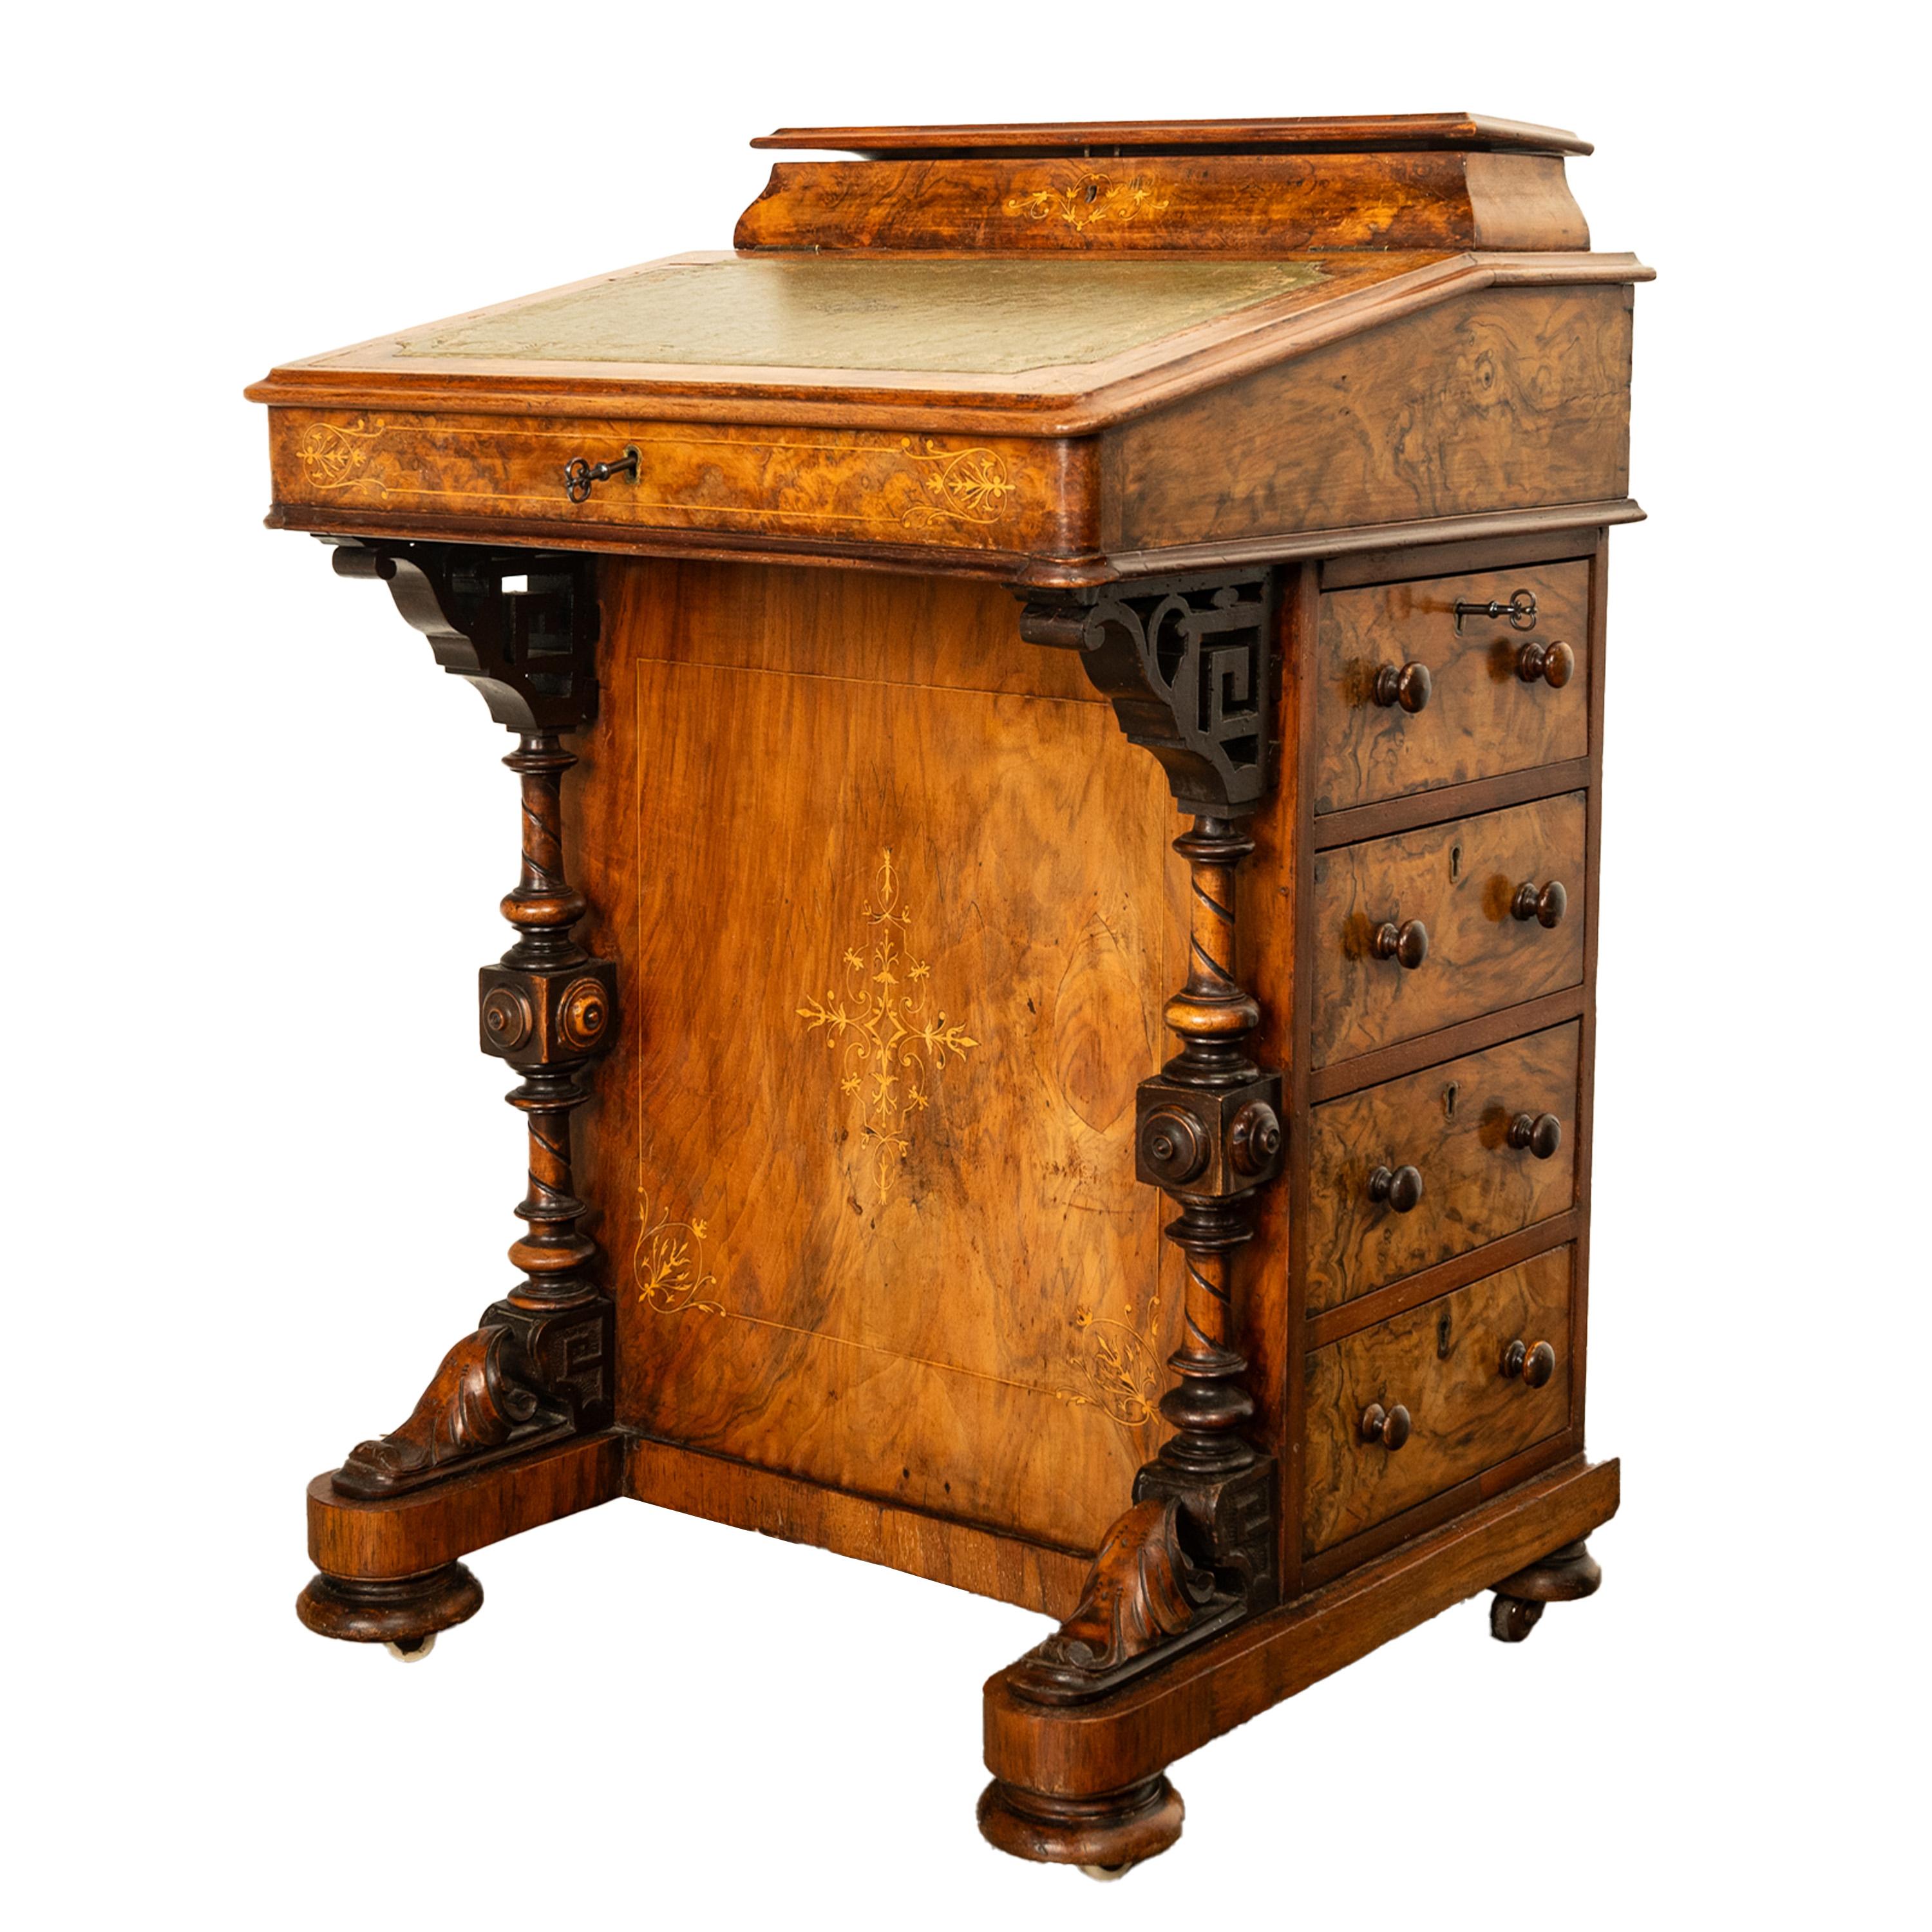 English Antique Victorian Burl Walnut Inlaid Marquetry Carved Davenport Desk 1860 For Sale